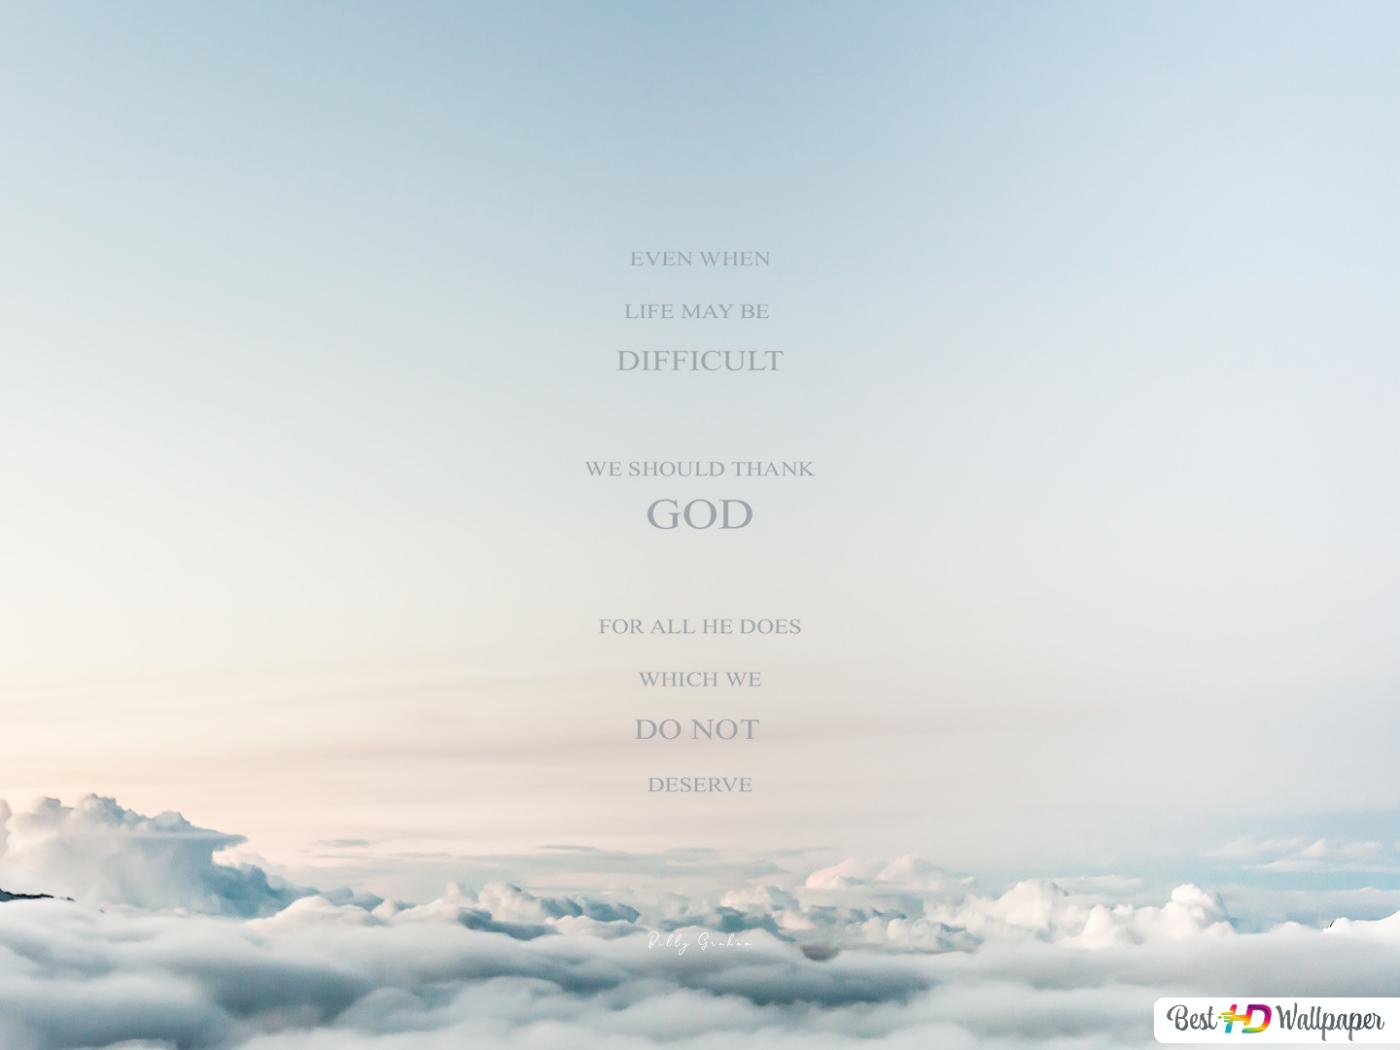 Even when life may be difficult. When should thank GOD. For all he does which we do not deserve. HD wallpaper download